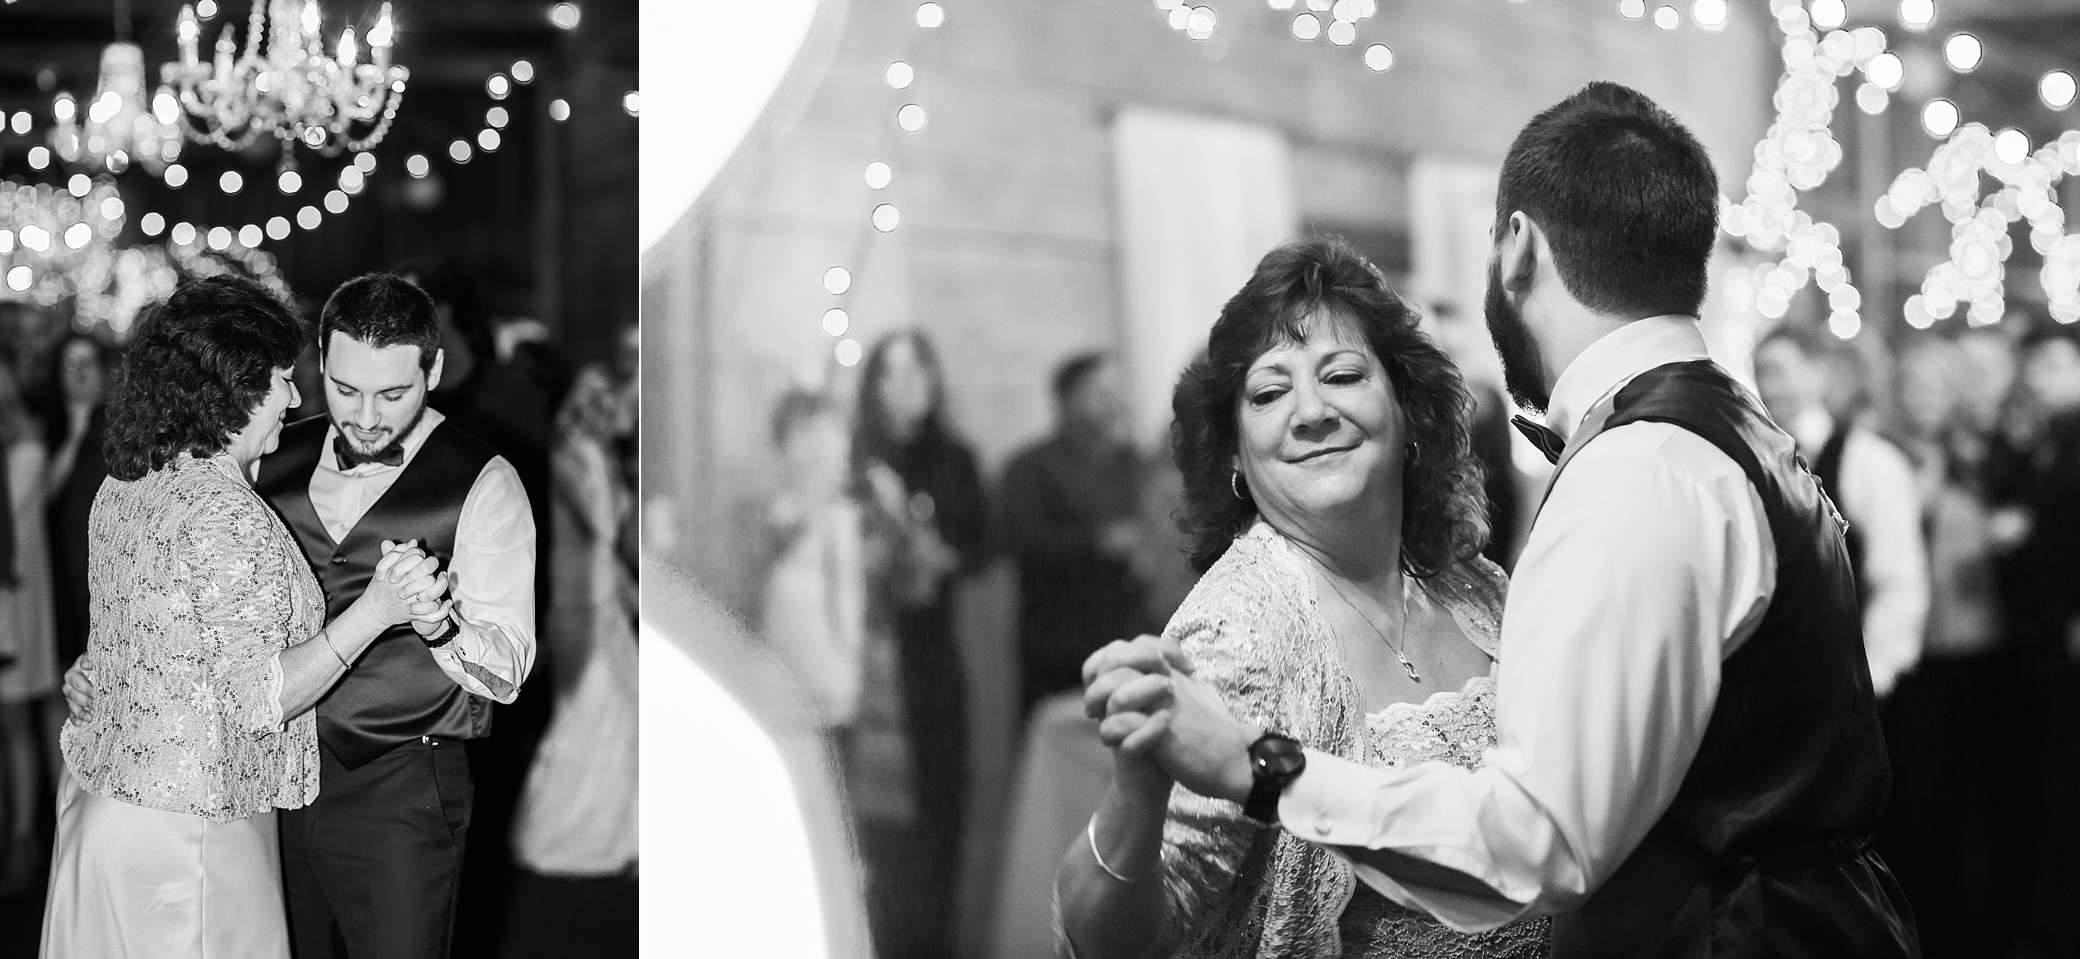 Groom and Mother First Dance | Megan Montalvo Photography 